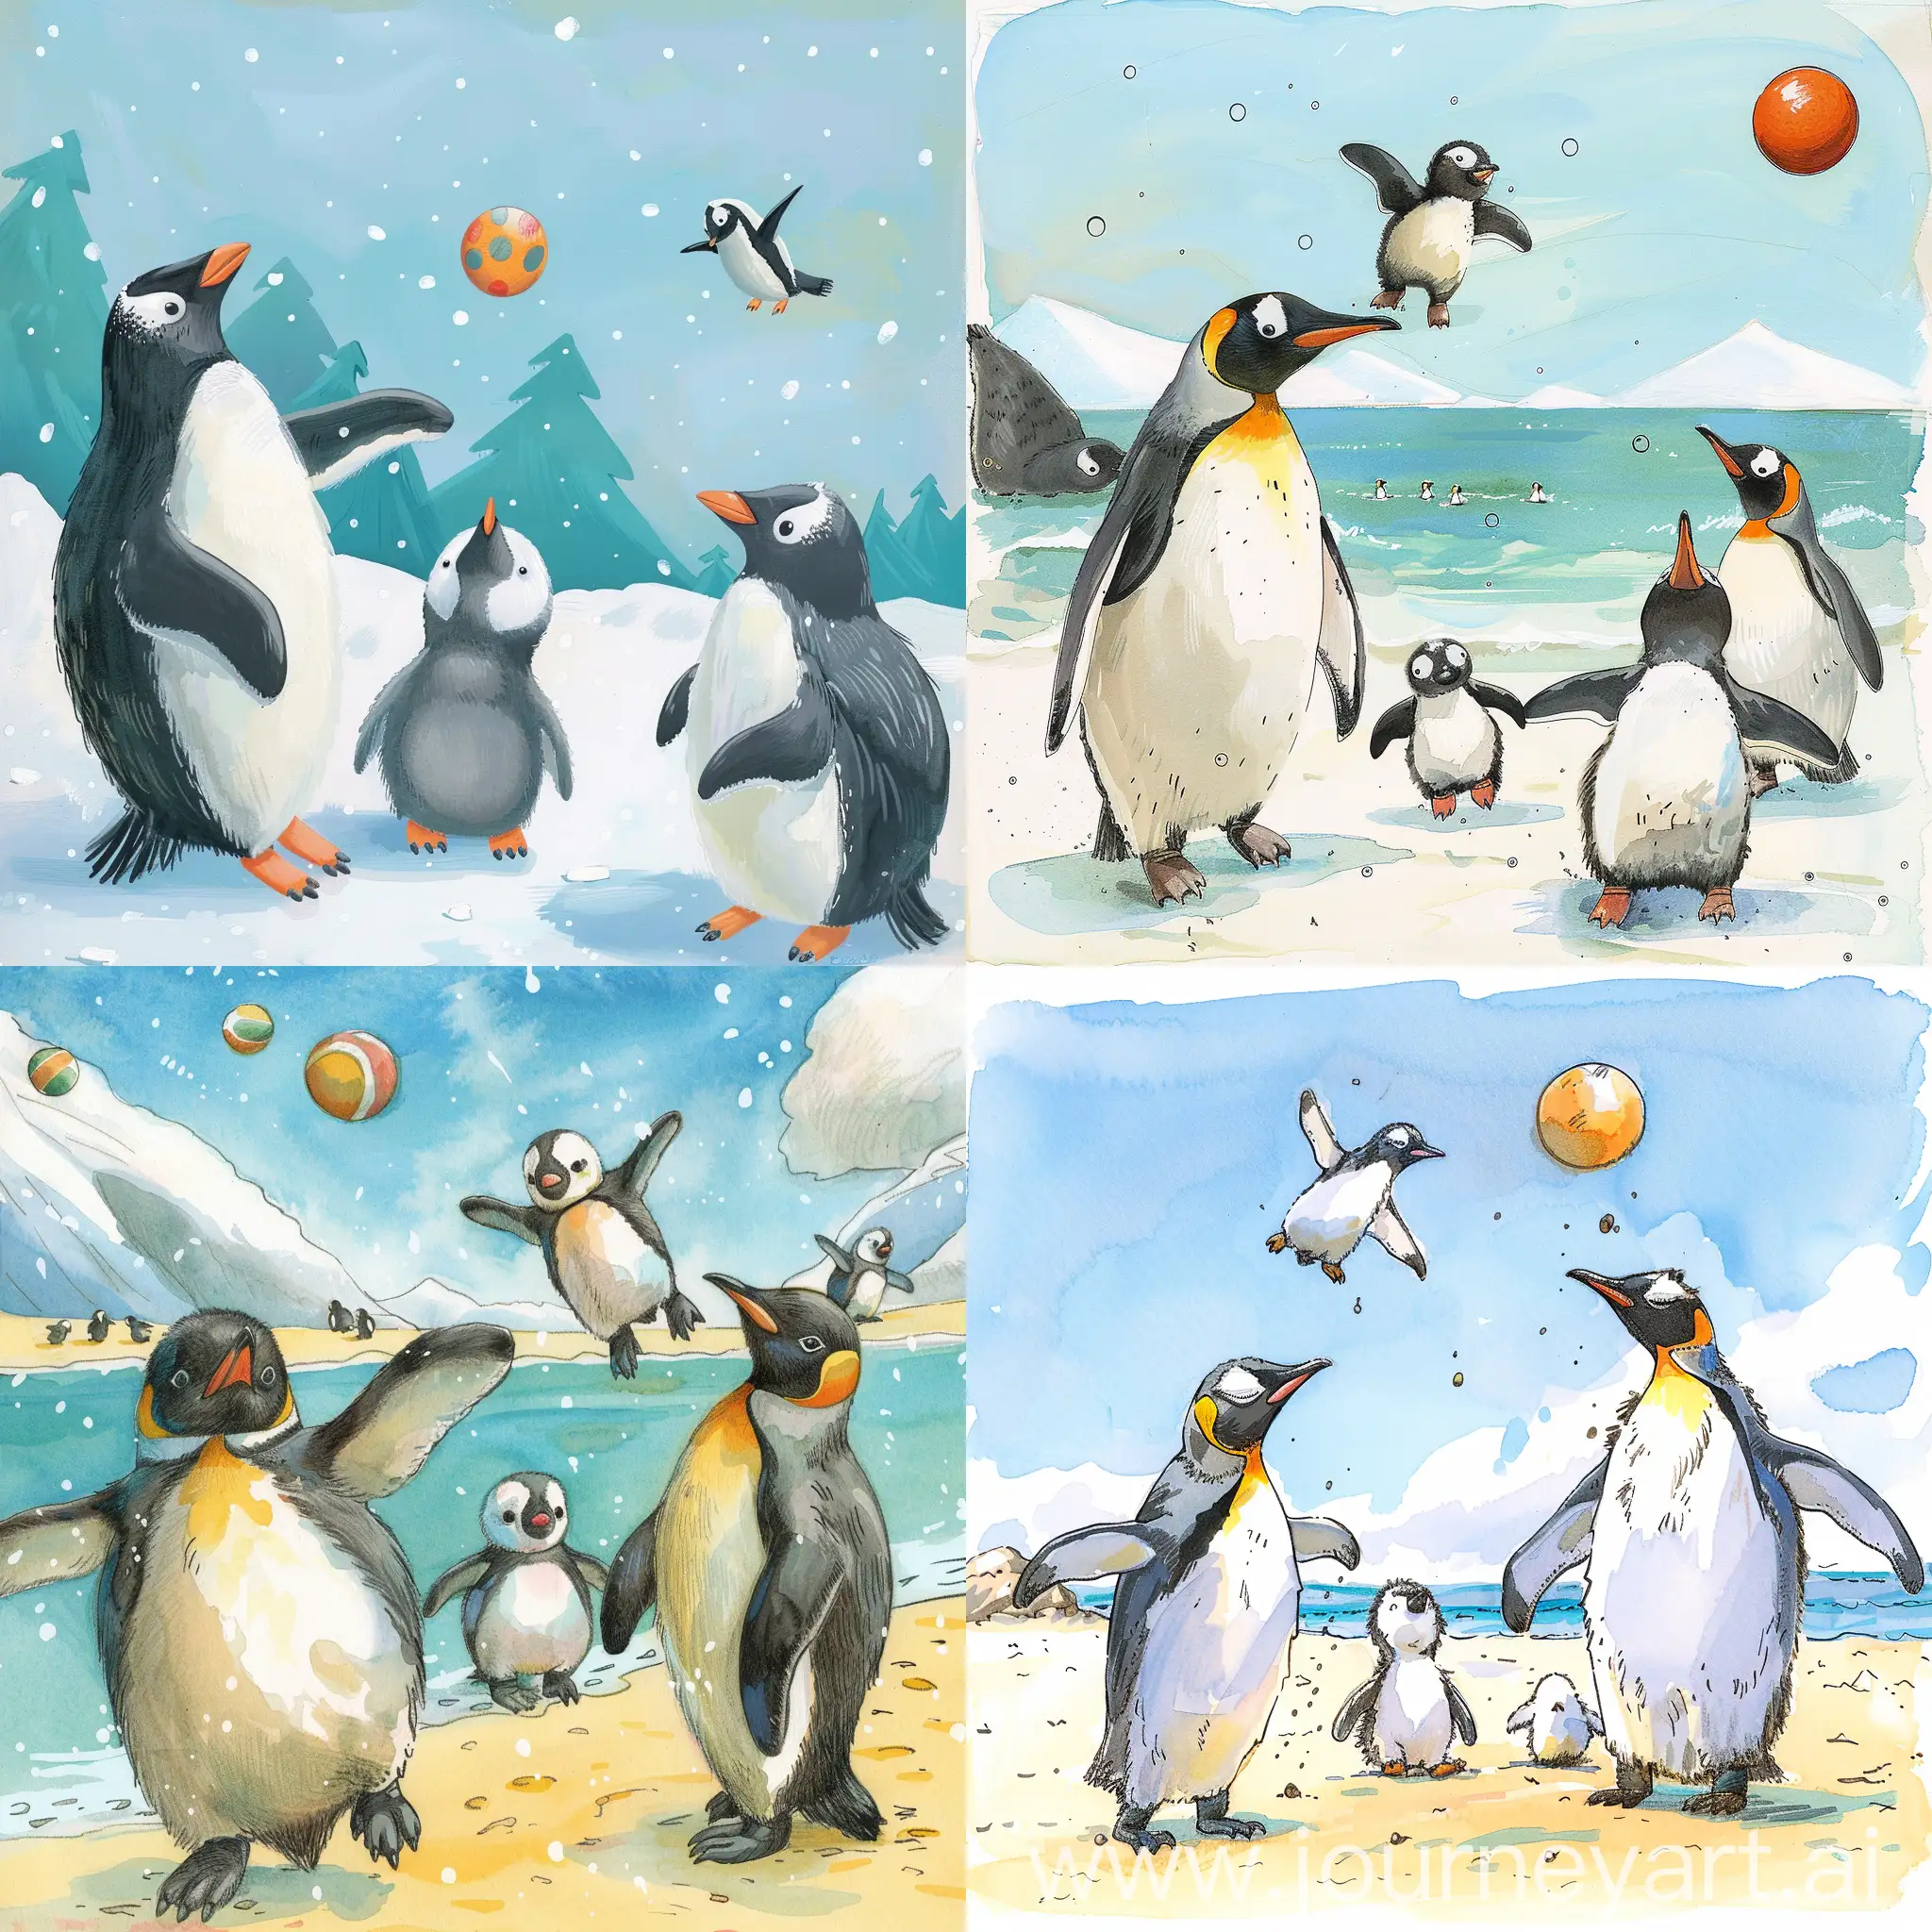 Playful-Penguin-Chick-Explores-with-Parents-in-Storybook-Illustration